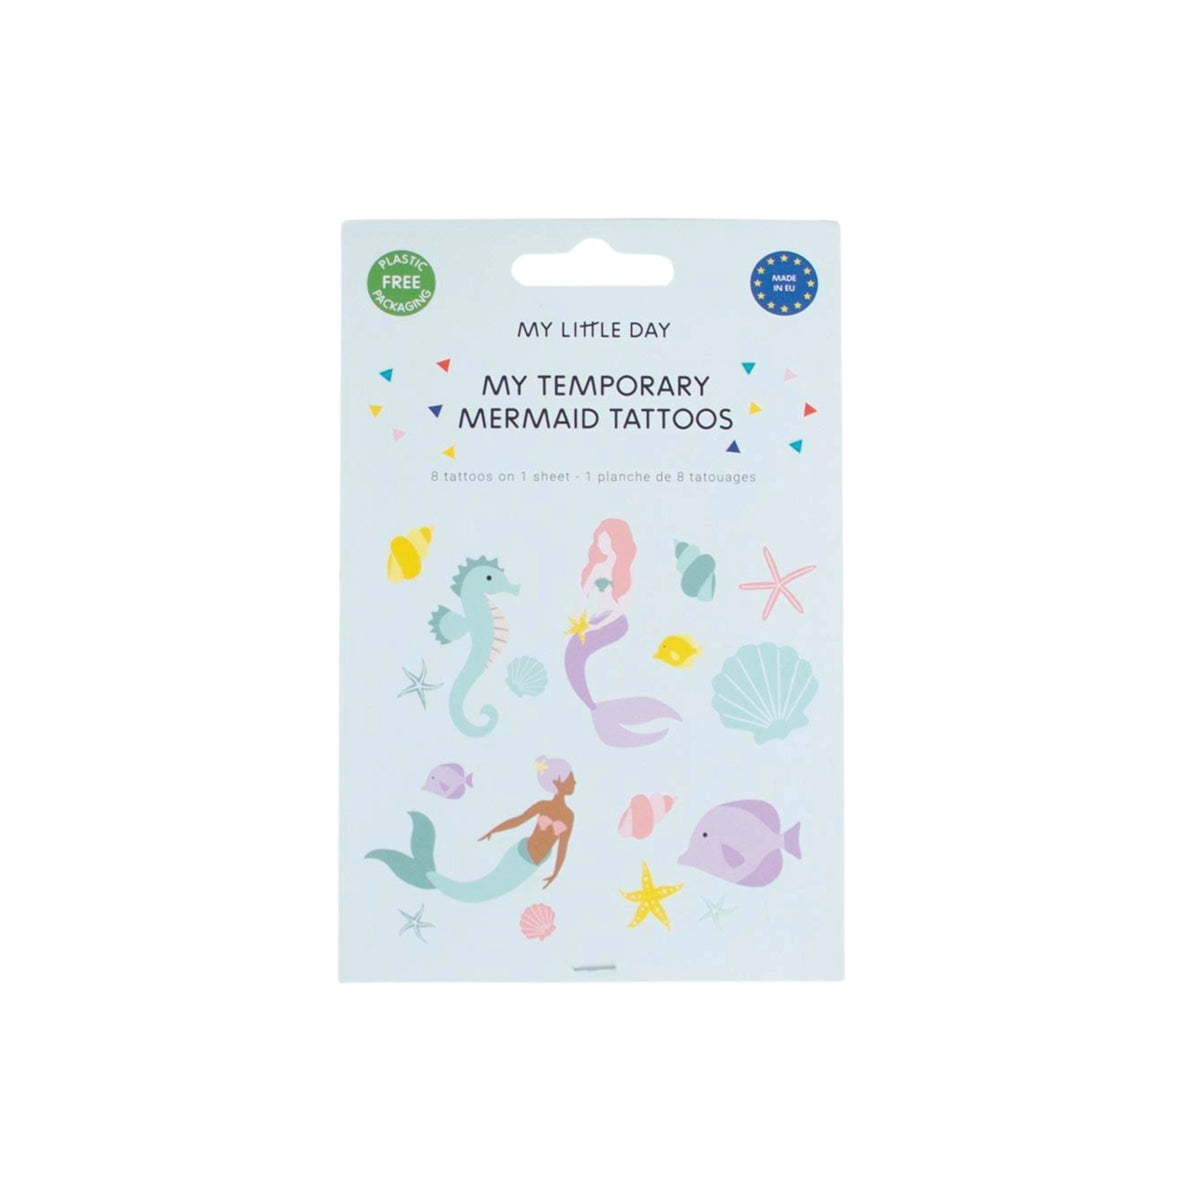 ArtCreativity Mermaid Temporary Tattoos for Kids - Bulk Pack of 144 Tattoos  in Assorted Mermaid Designs, Non-Toxic 2 Inch Tats, Birthday Party Favors,  Goodie Bag Fillers, Non-Candy Halloween Treats : Amazon.in: Beauty